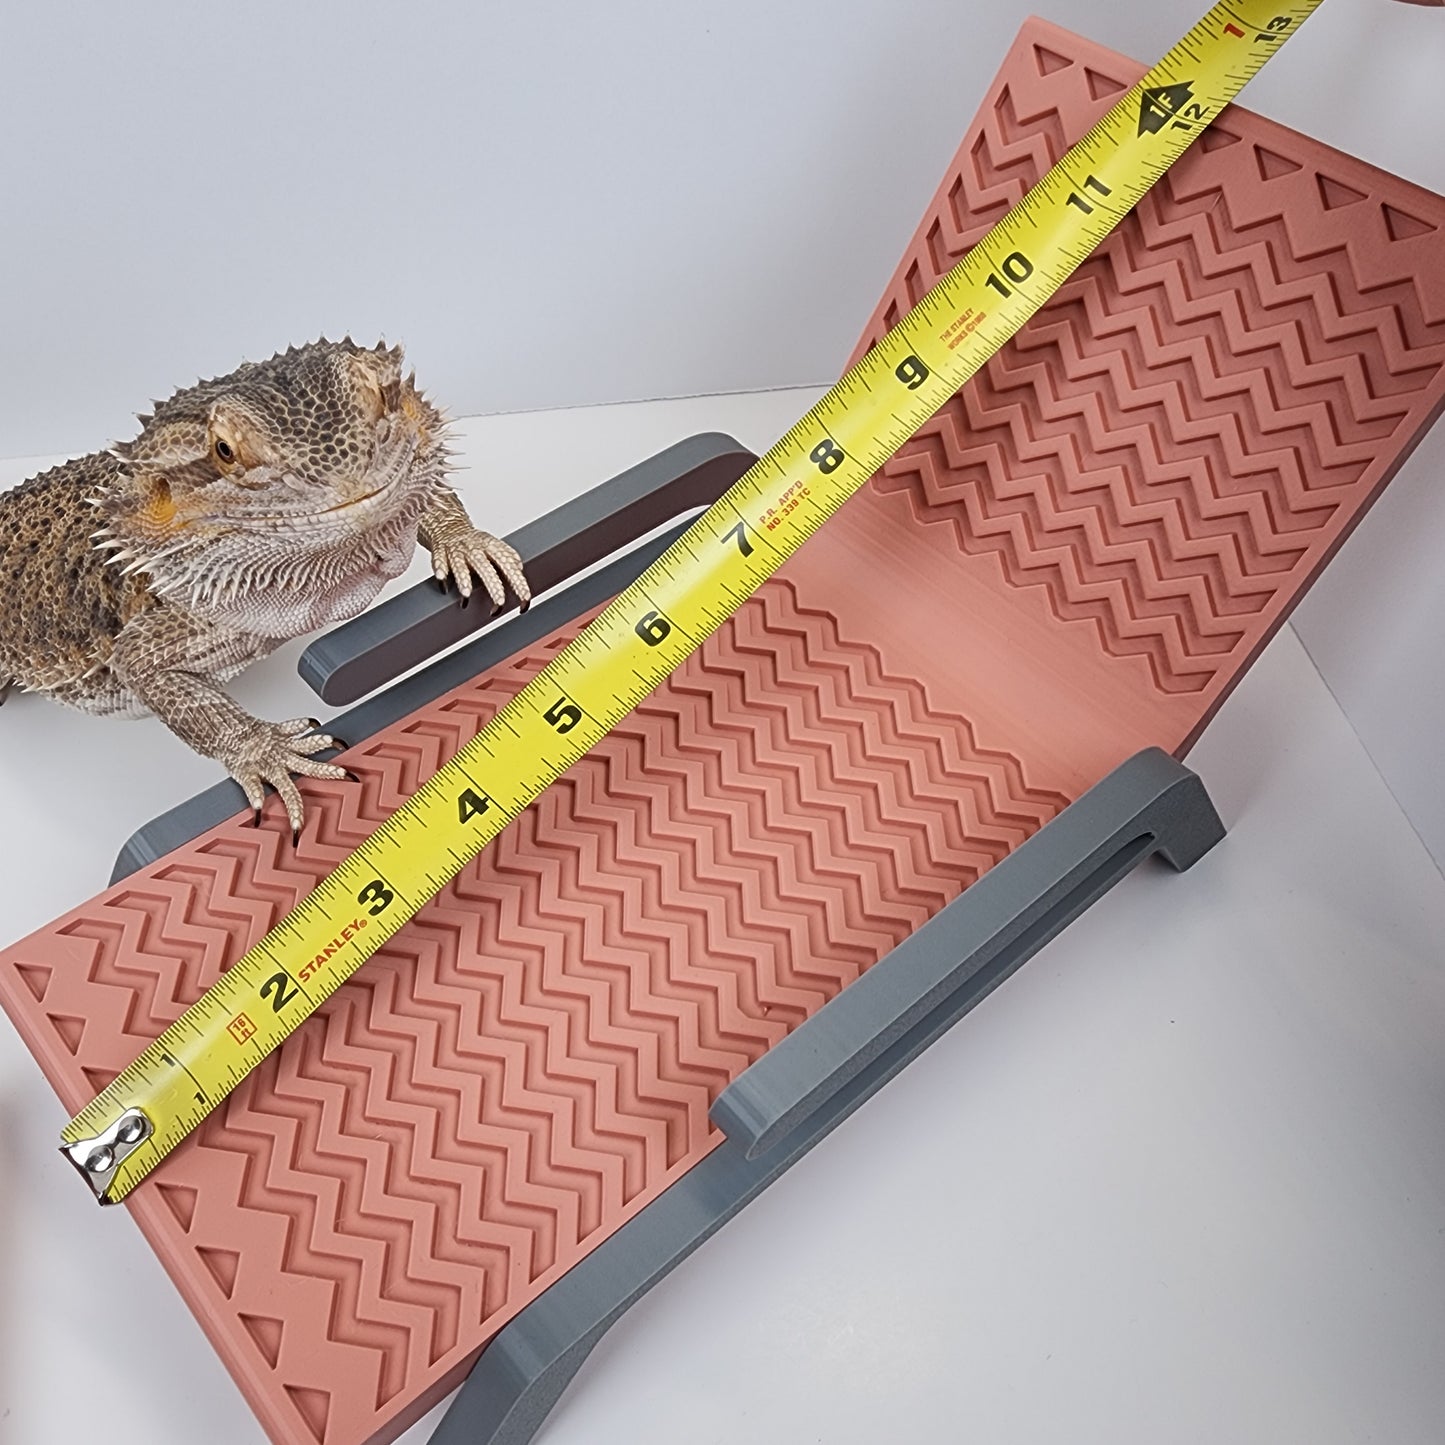 Bearded Dragon Sahara Suite Kit | Beardie lounge chair, picnic table dish, and personalized cactus sign stand! Bearded dragon decor reptile desert